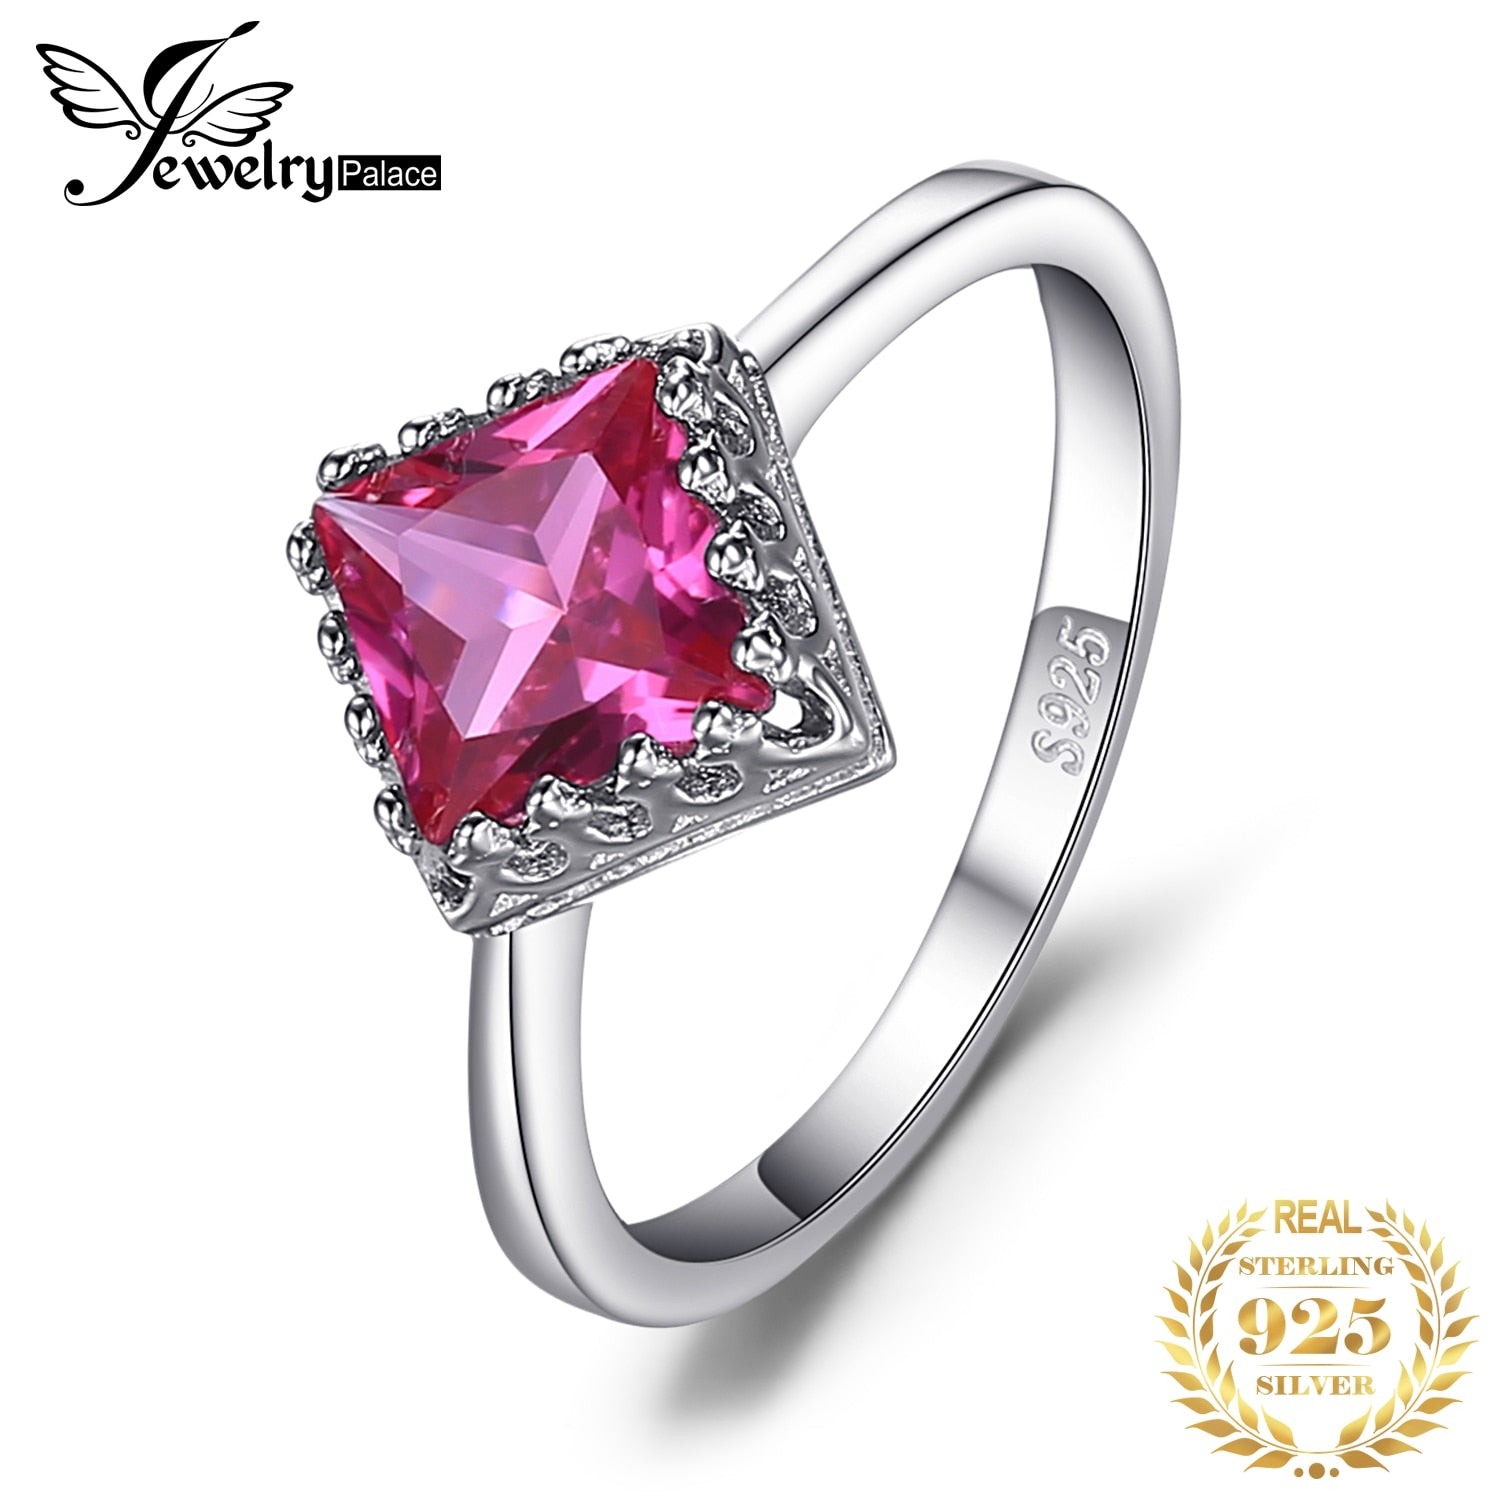 JewelryPalace Classic 1.4ct Square Created Pink Sapphire 925 Sterling Silver Engagement Ring for Woman Gemstone Fine Jewelry